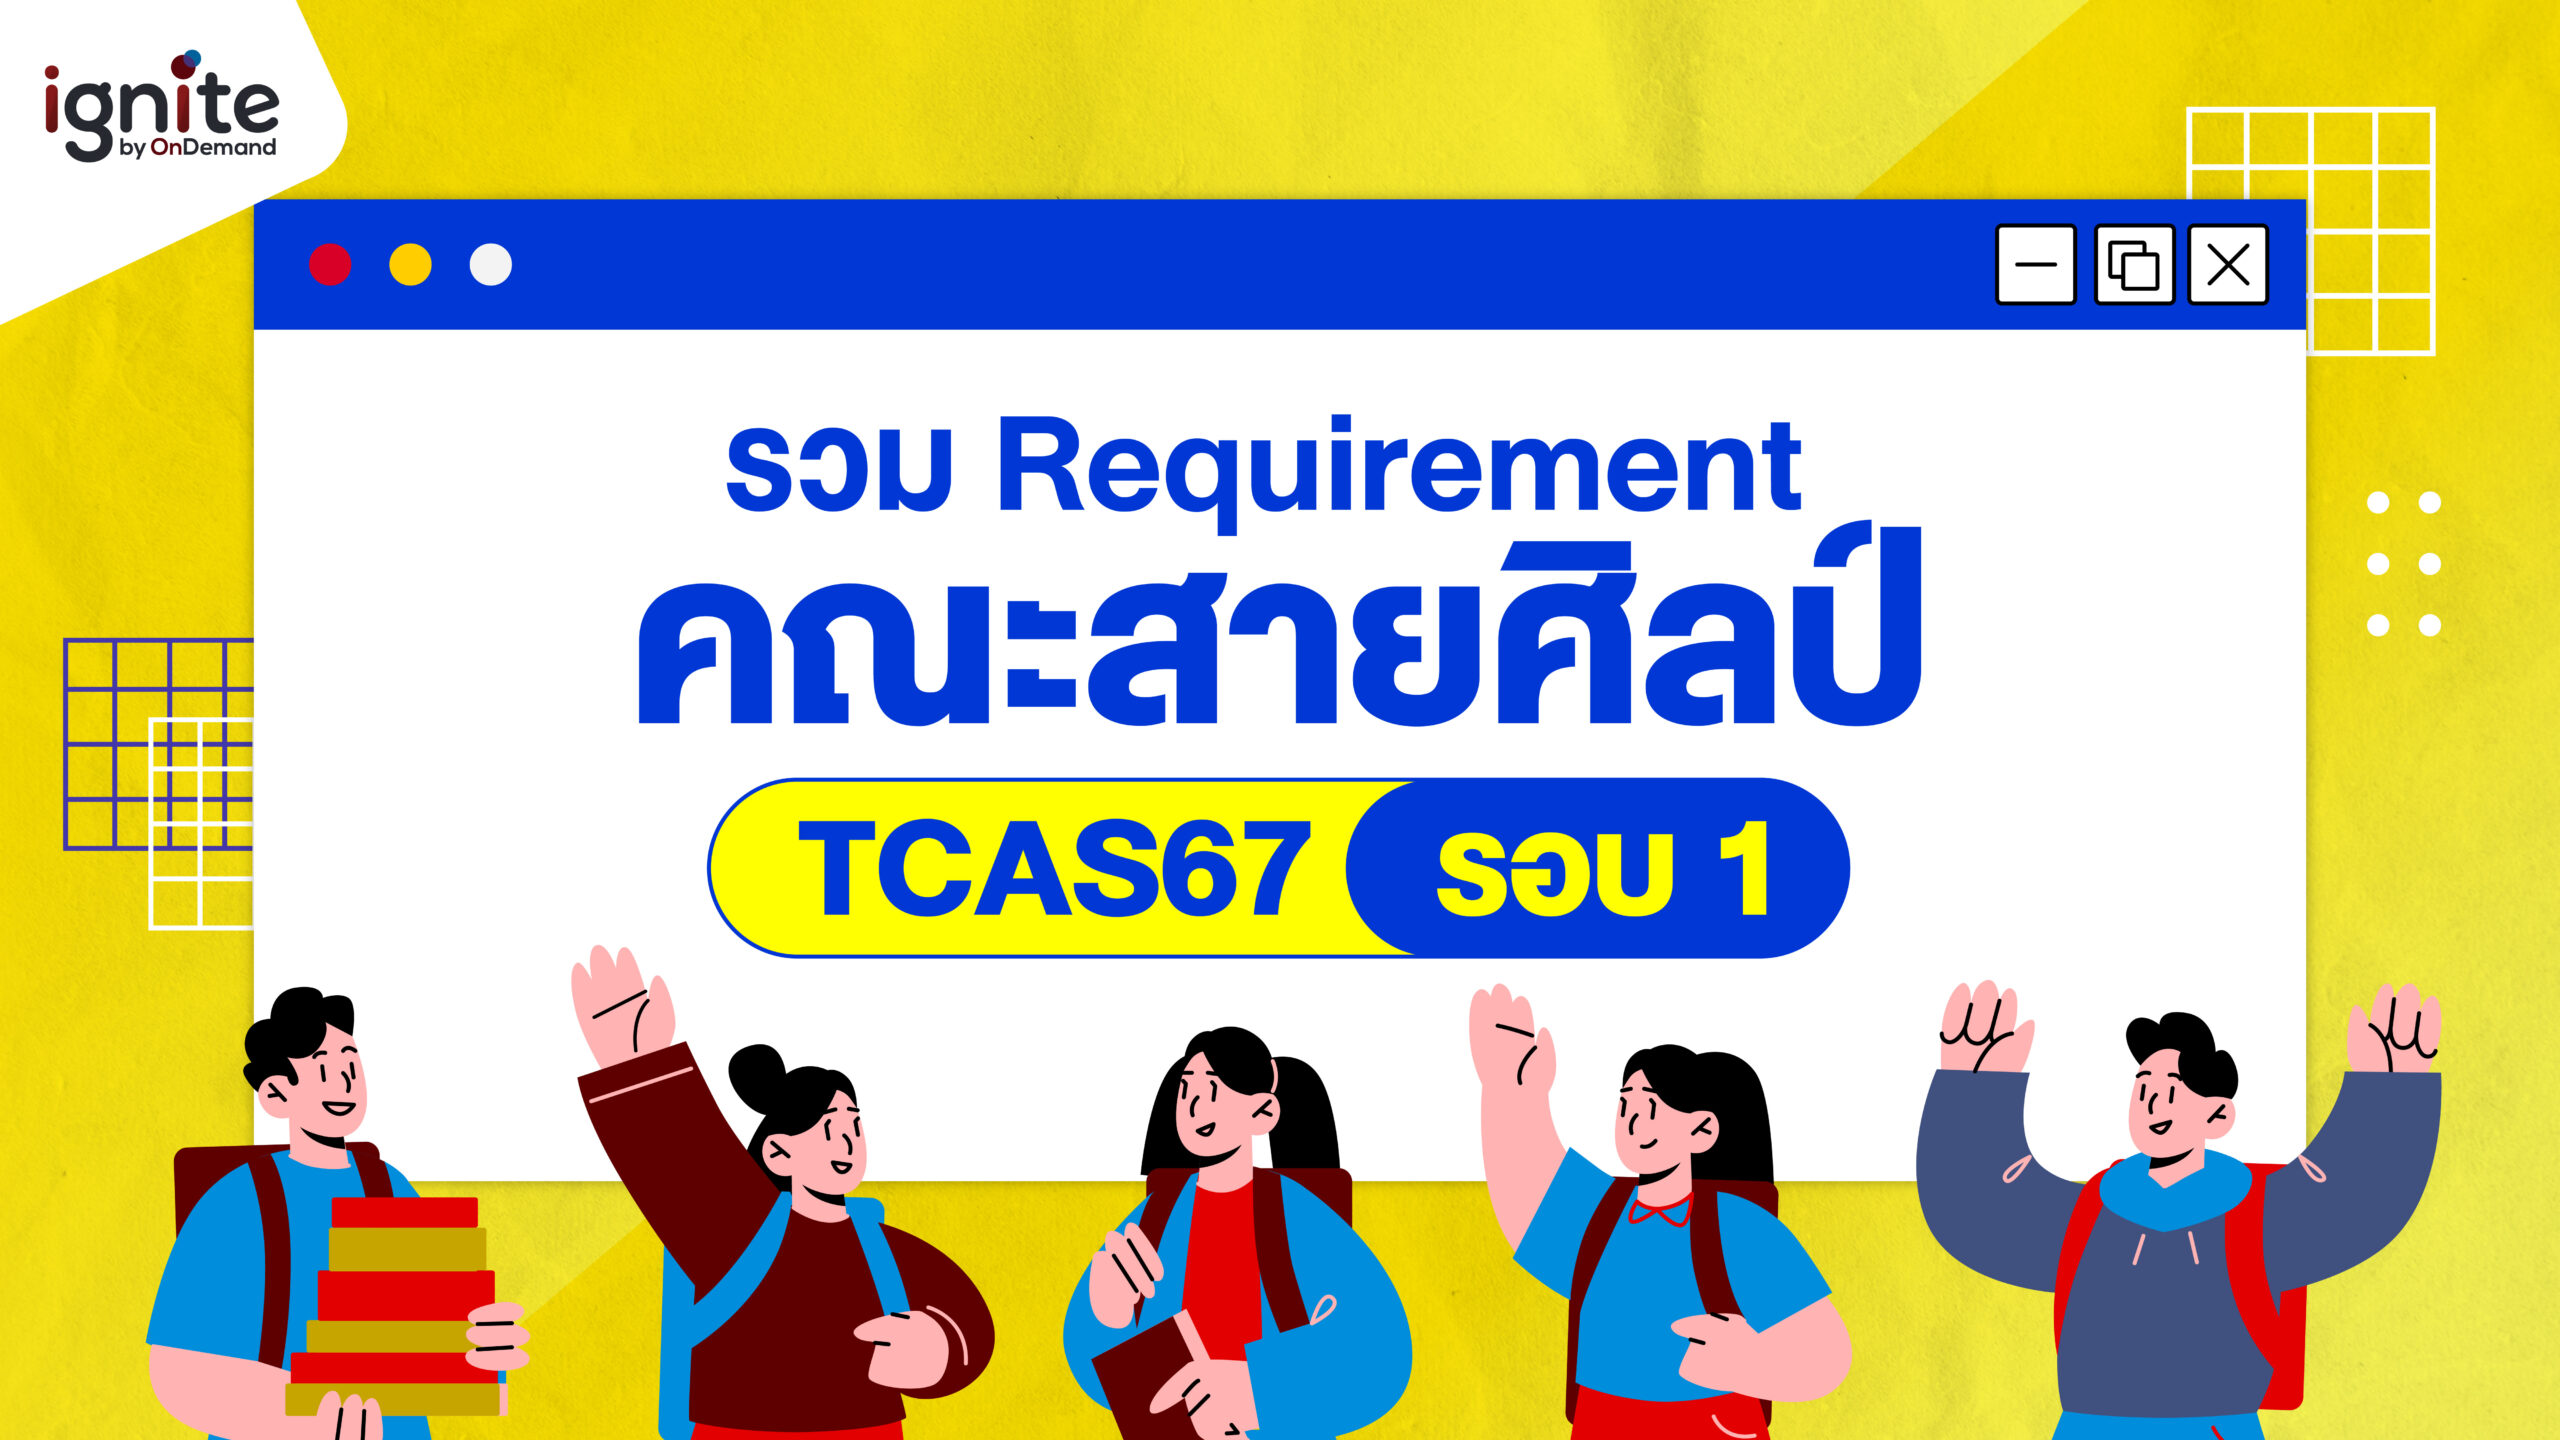 requirement for all faculty of art for tcas 67 round 1